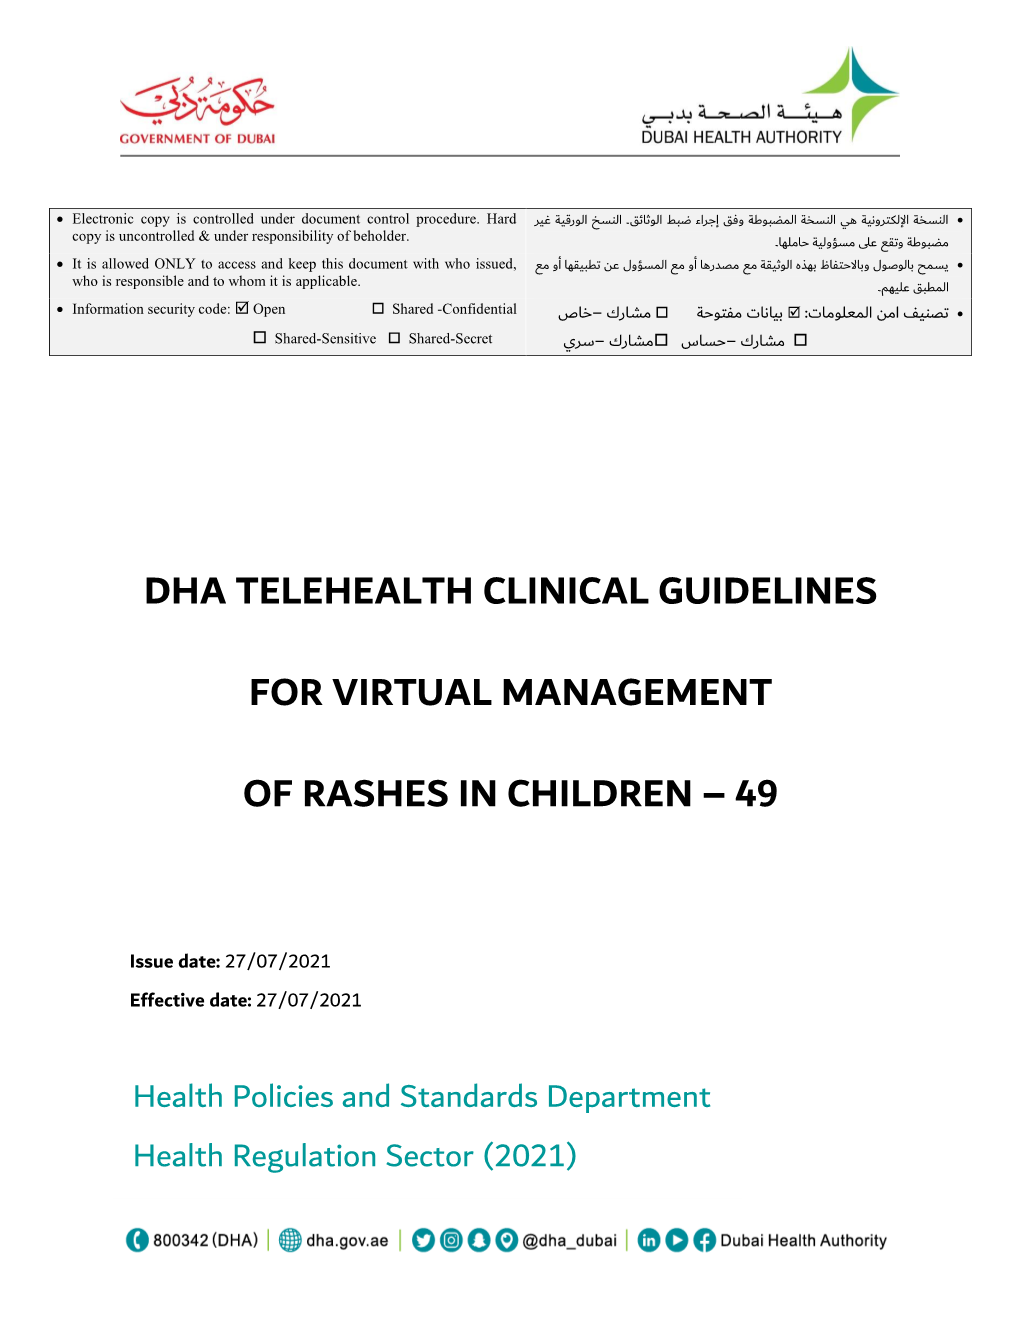 Dha Telehealth Clinical Guidelines for Virtual Management of Rashes in Children – 49